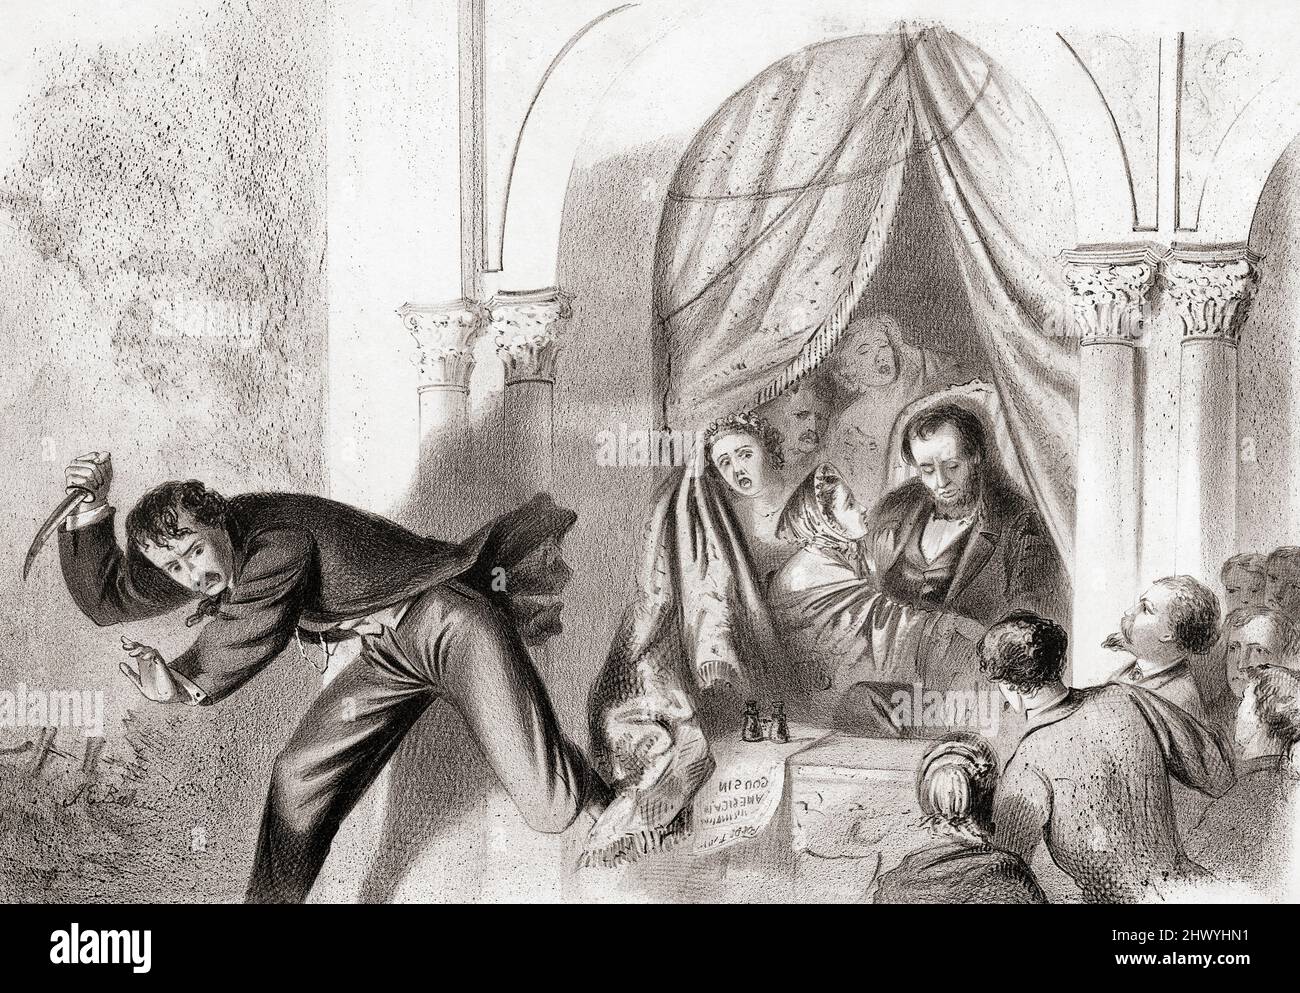 The assassination on April 14, 1865 of President Abraham Lincoln by John Wilkes Booth in Ford's Theatre, Washington, during the play Our American Cousin.  After shooting Lincoln Booth leapt from the presidential box onto the stage to make his escape.  After a contemporary illustration. Stock Photo